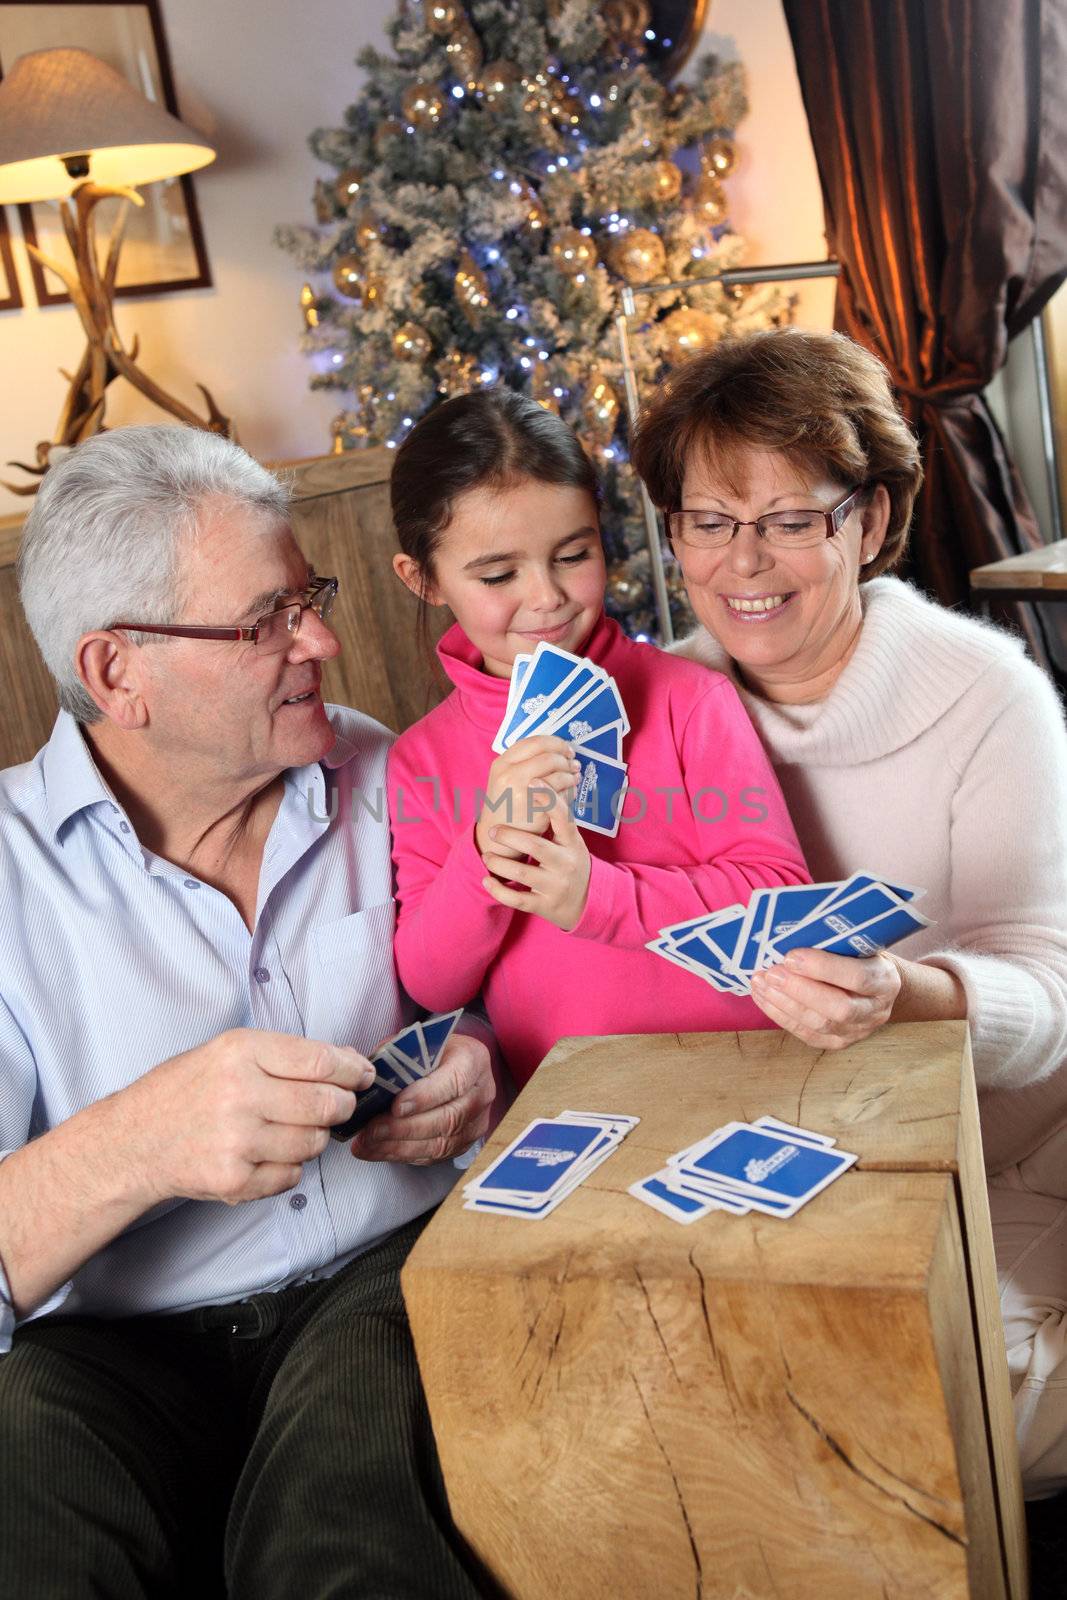 Family playing card game at Christmas by phovoir